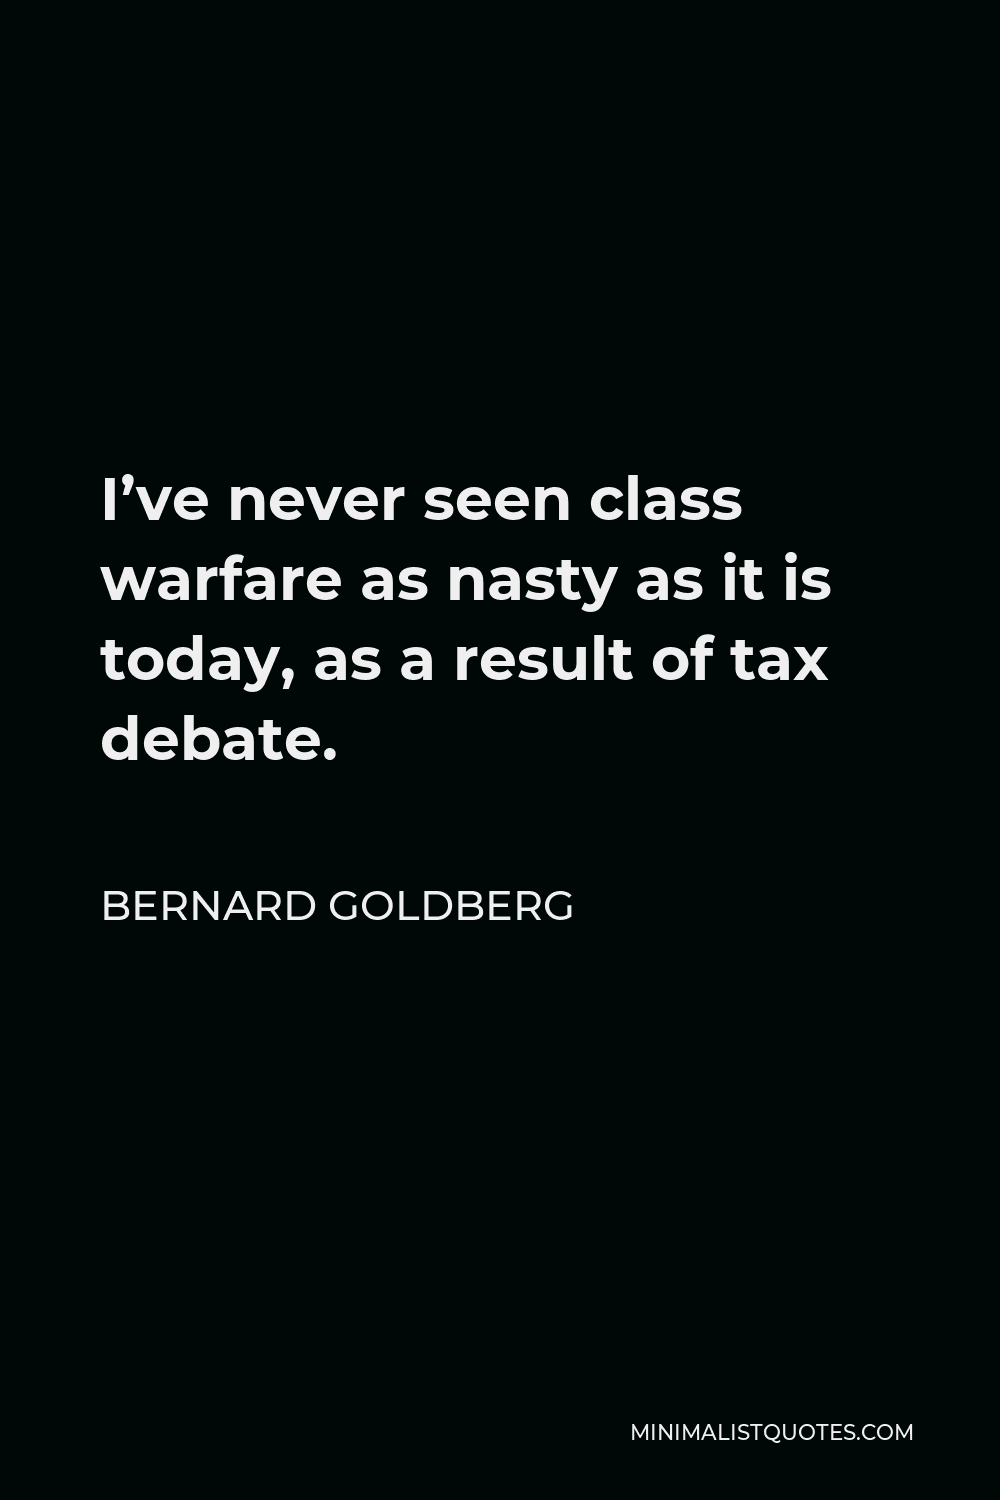 Bernard Goldberg Quote - I’ve never seen class warfare as nasty as it is today, as a result of tax debate.